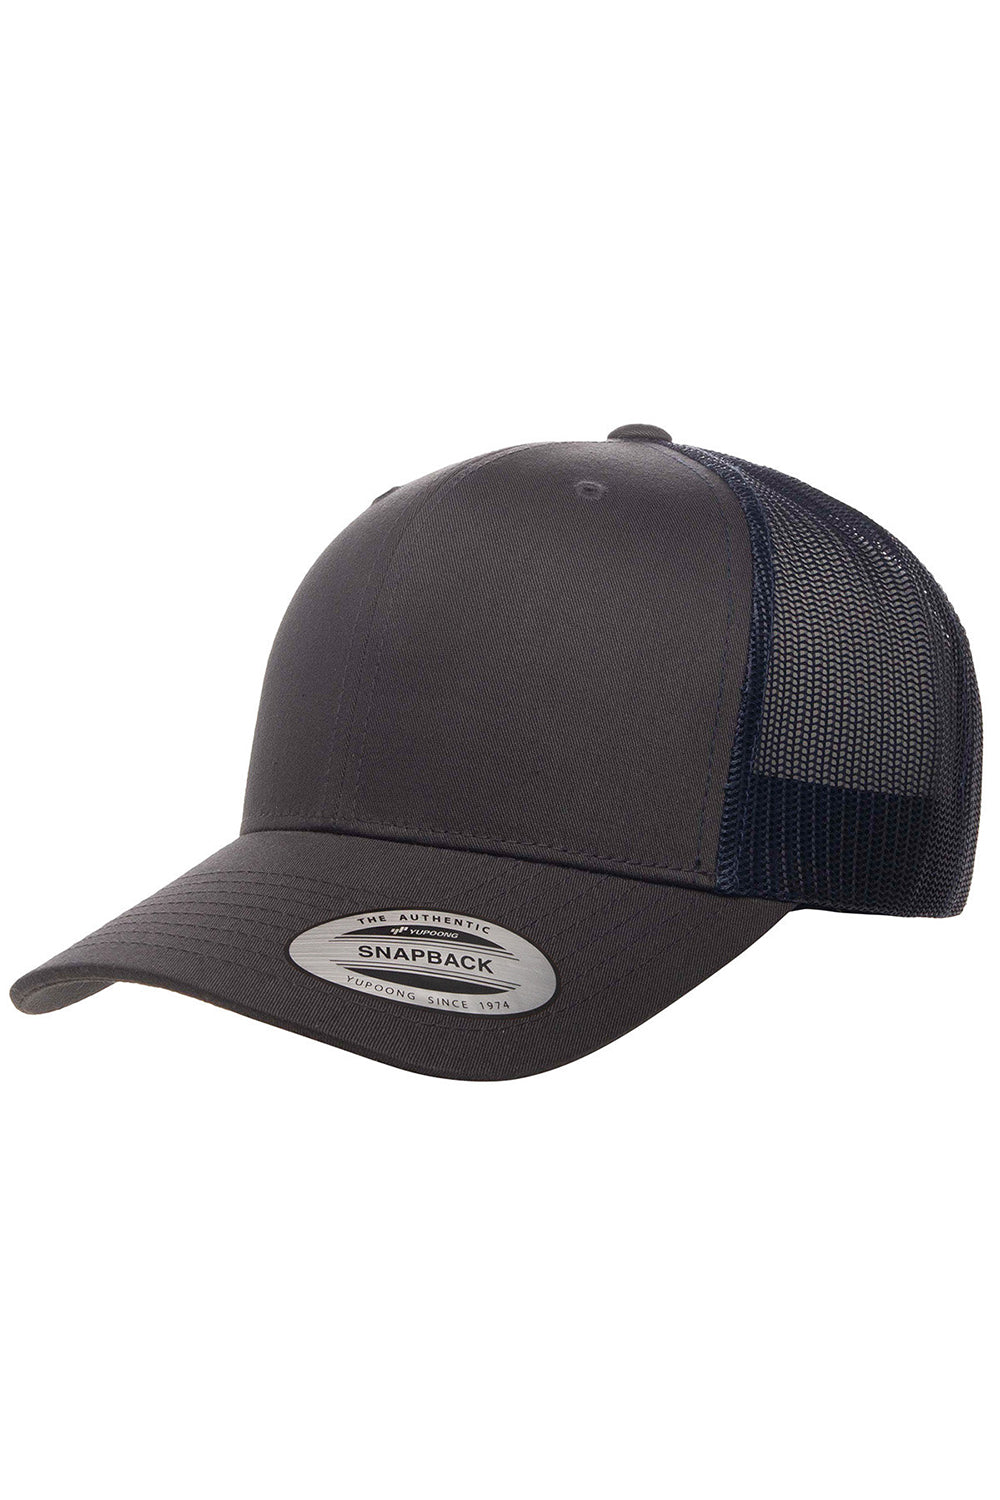 Yupoong 6606 Mens Adjustable Trucker Hat Charcoal Grey/Navy Blue Front